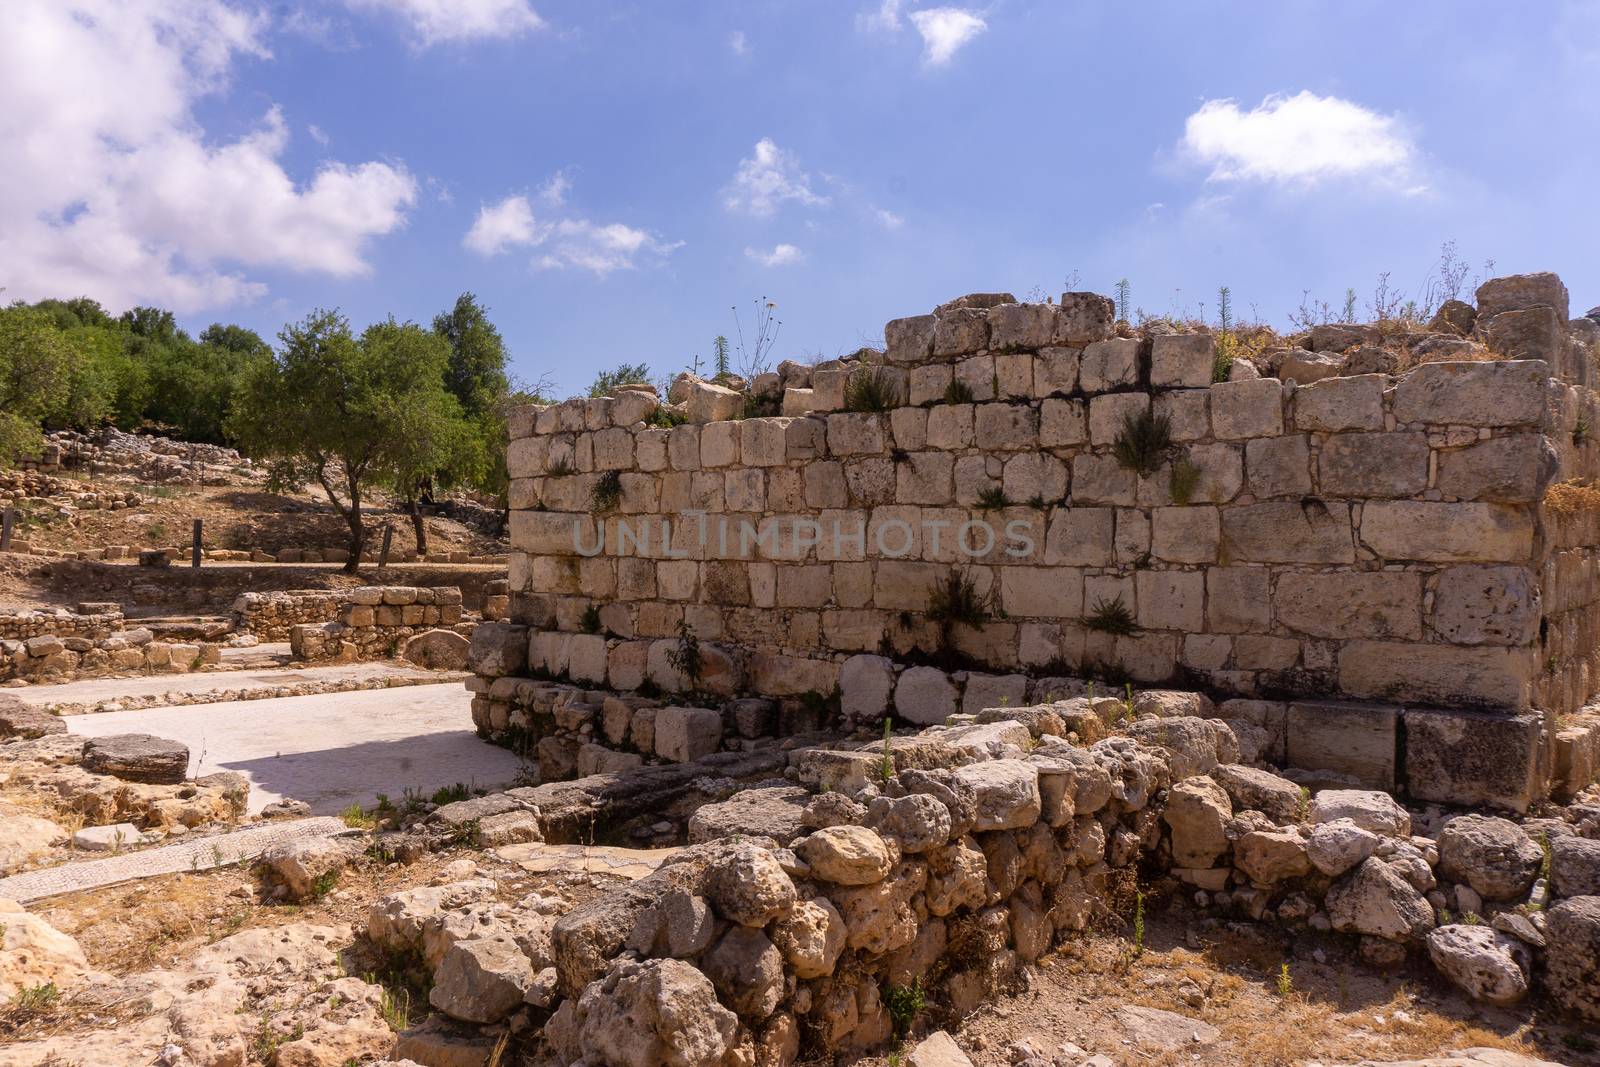 Excavations in archaeology park of Samaria settlement by javax